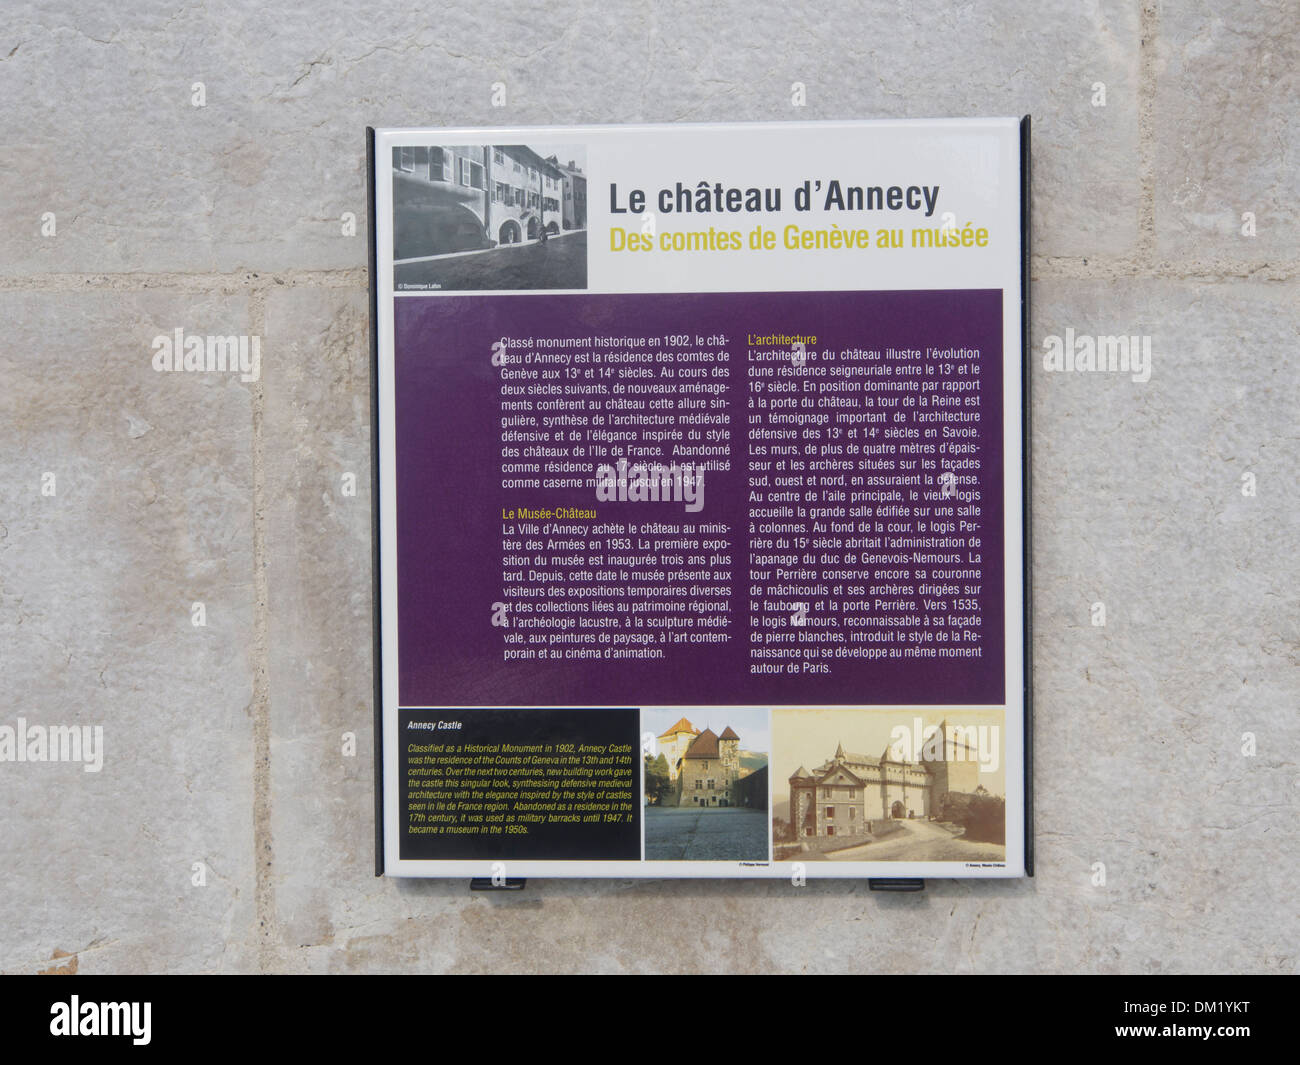 Chateau de Annecy, medieval castle in Annecy France, information board Stock Photo